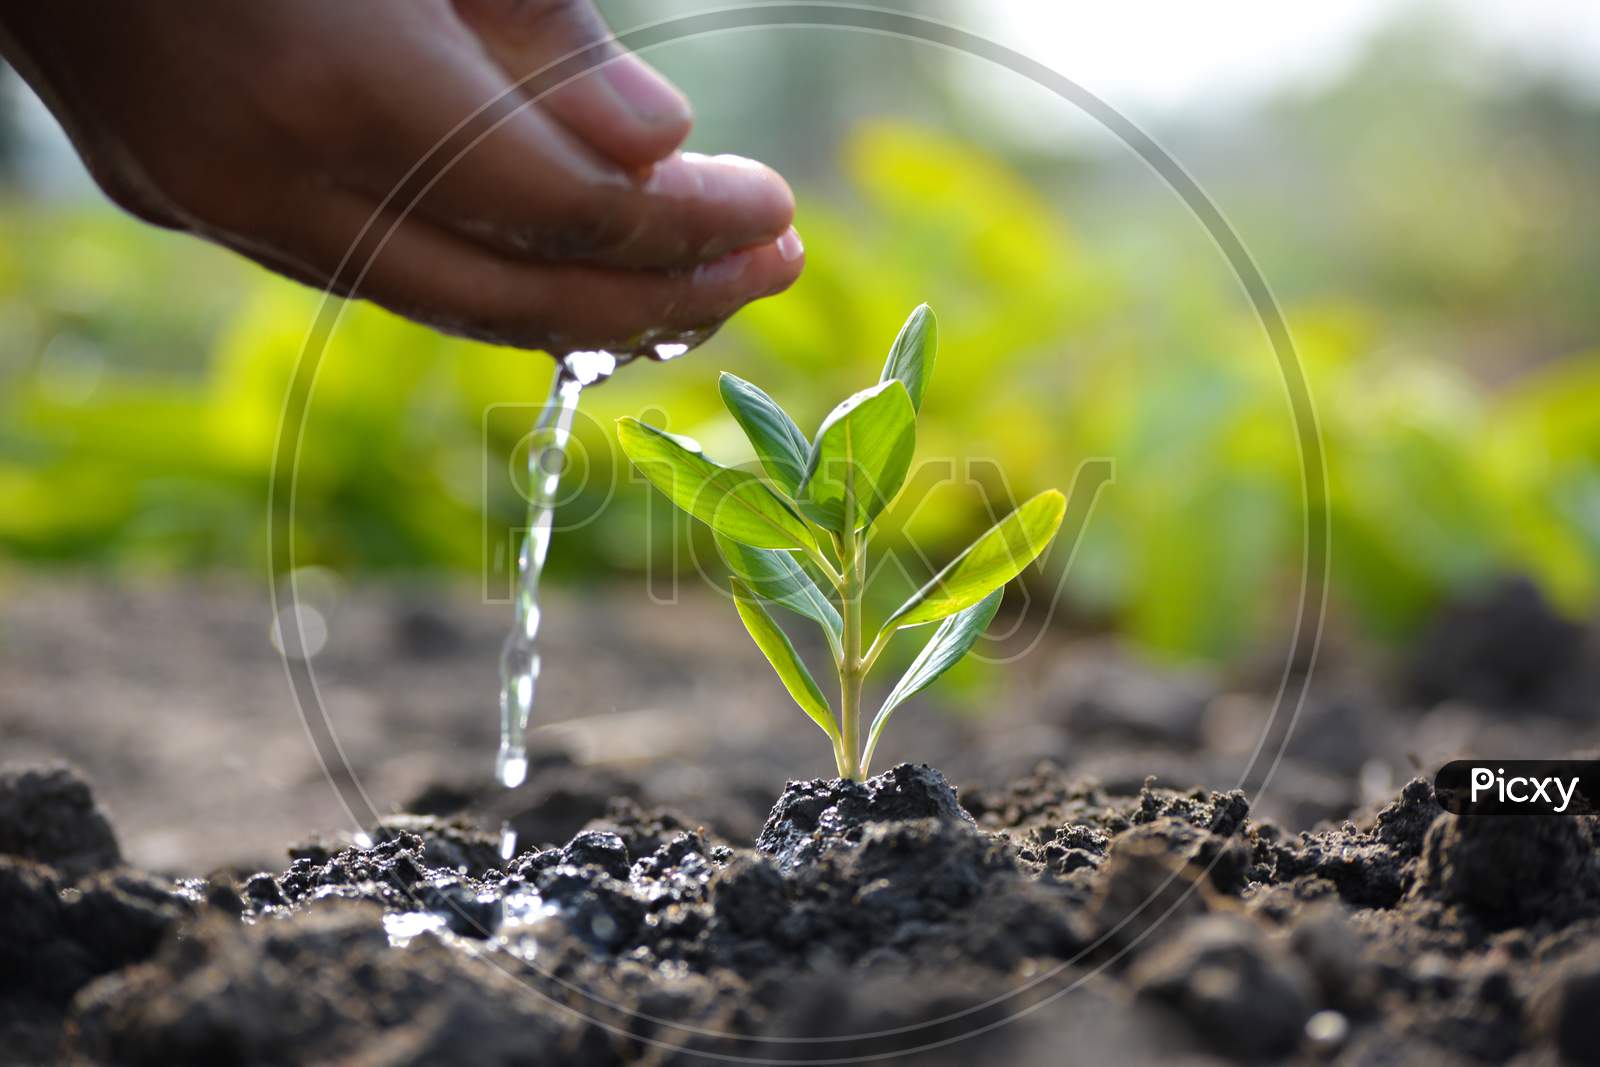 Farmer's hand watering a young plant. Earth day concept